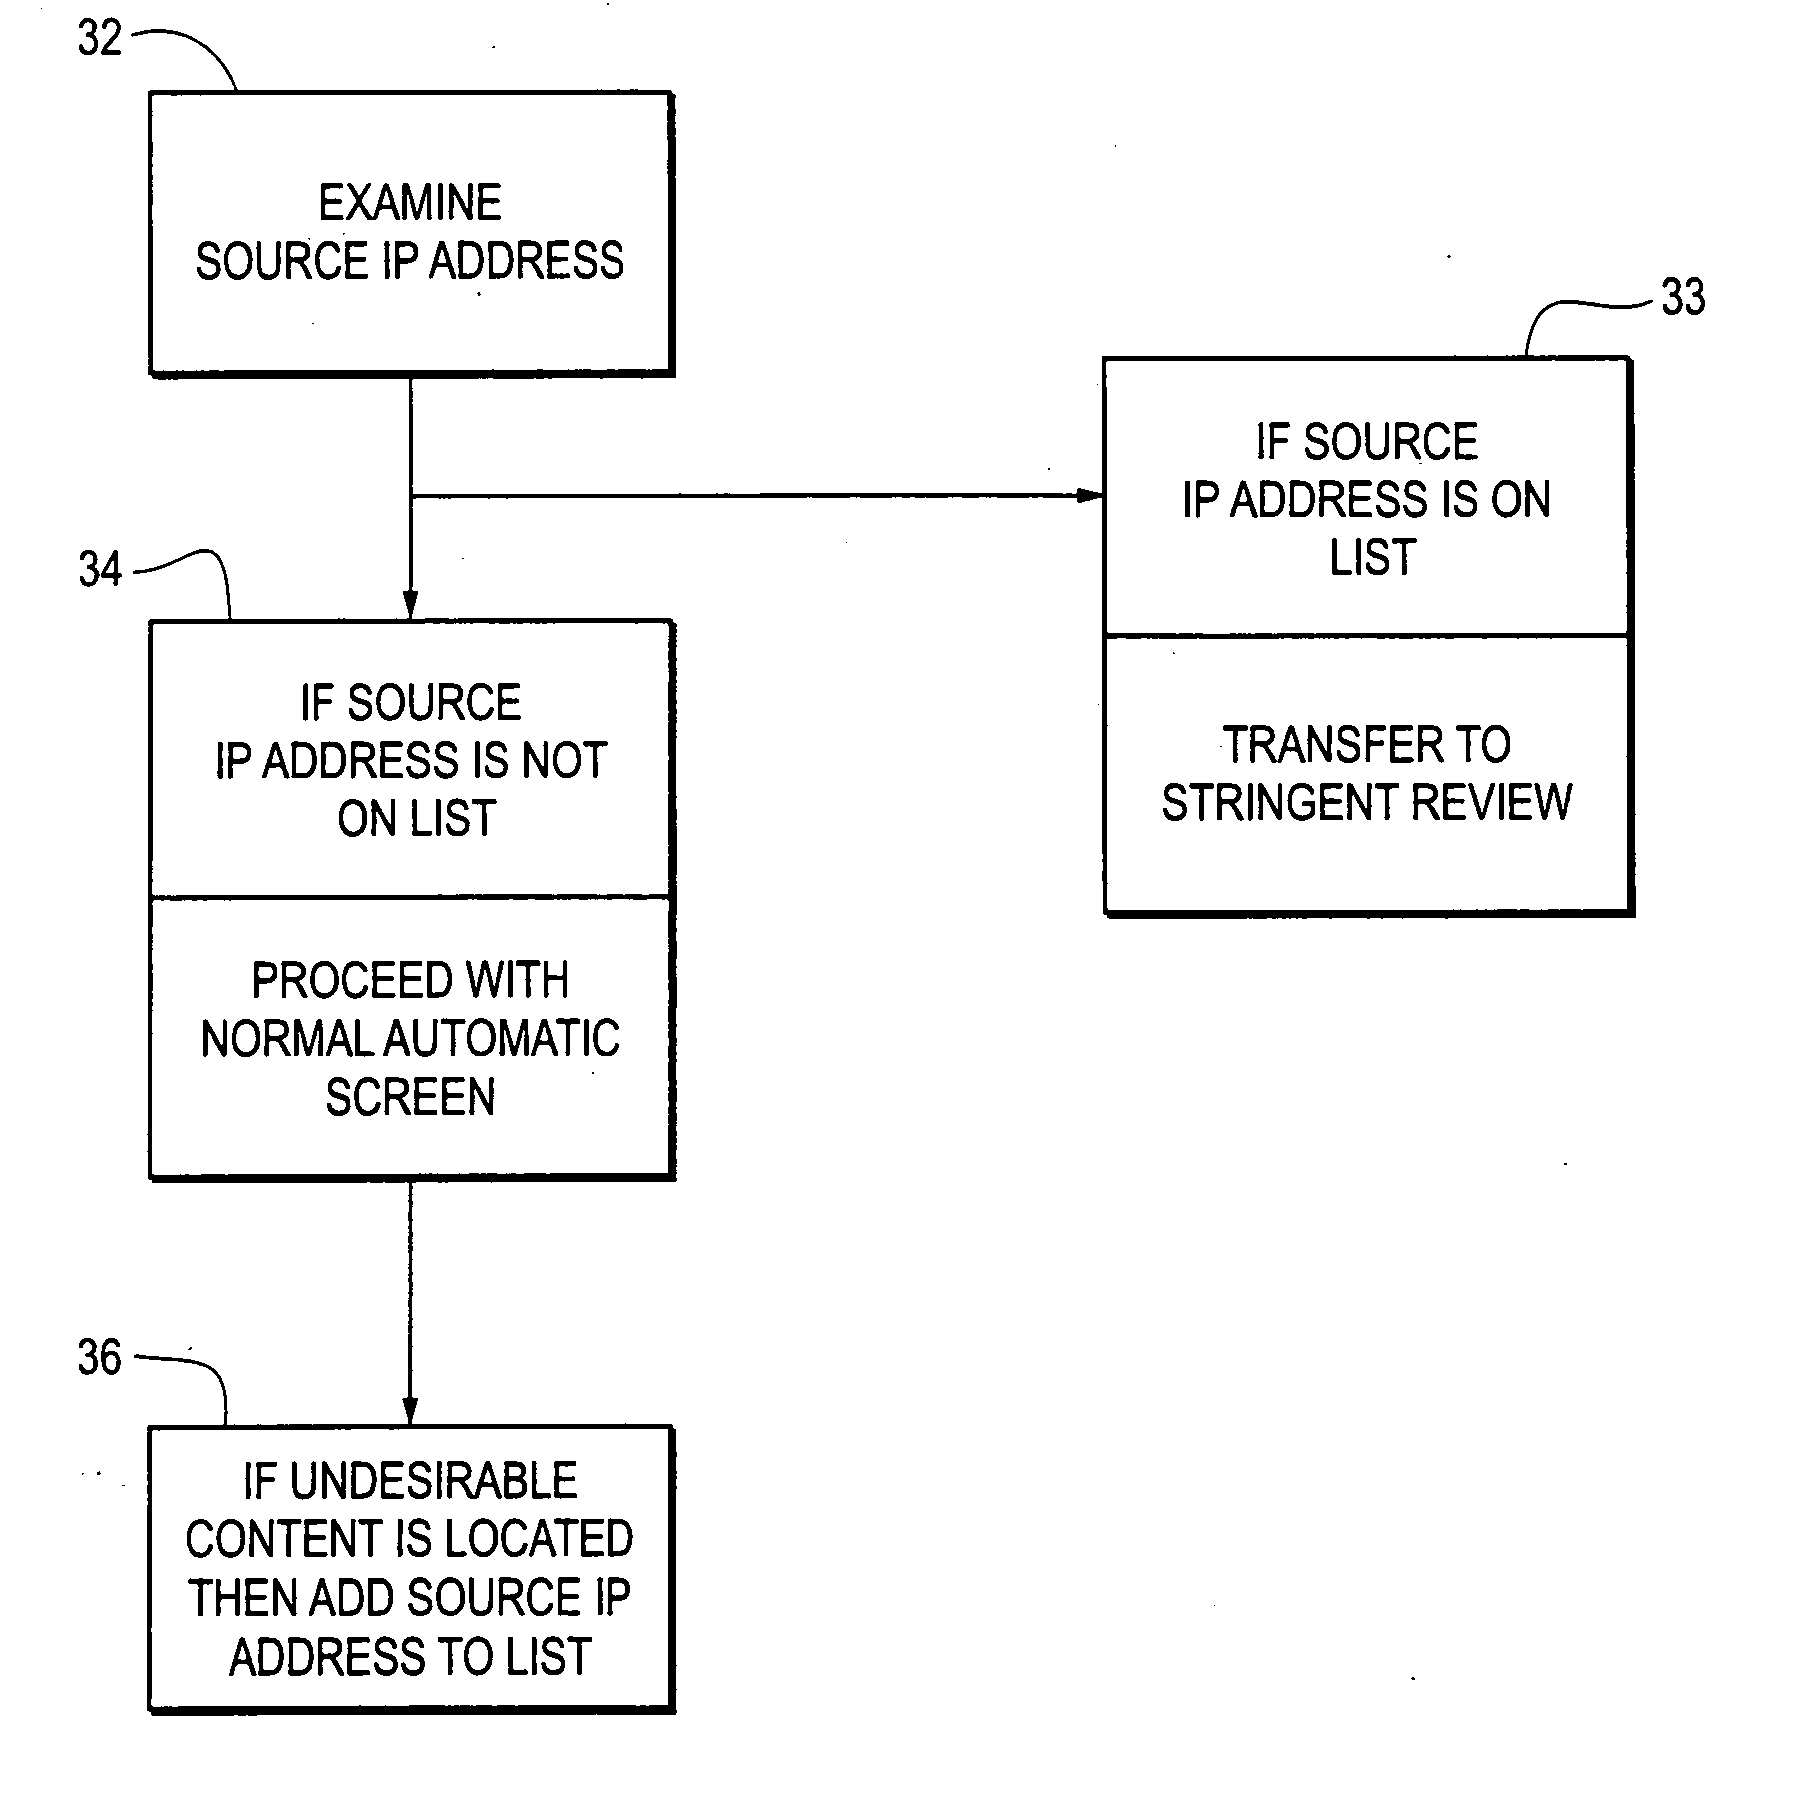 Systems and methods for enhancing the screening of electronic message data